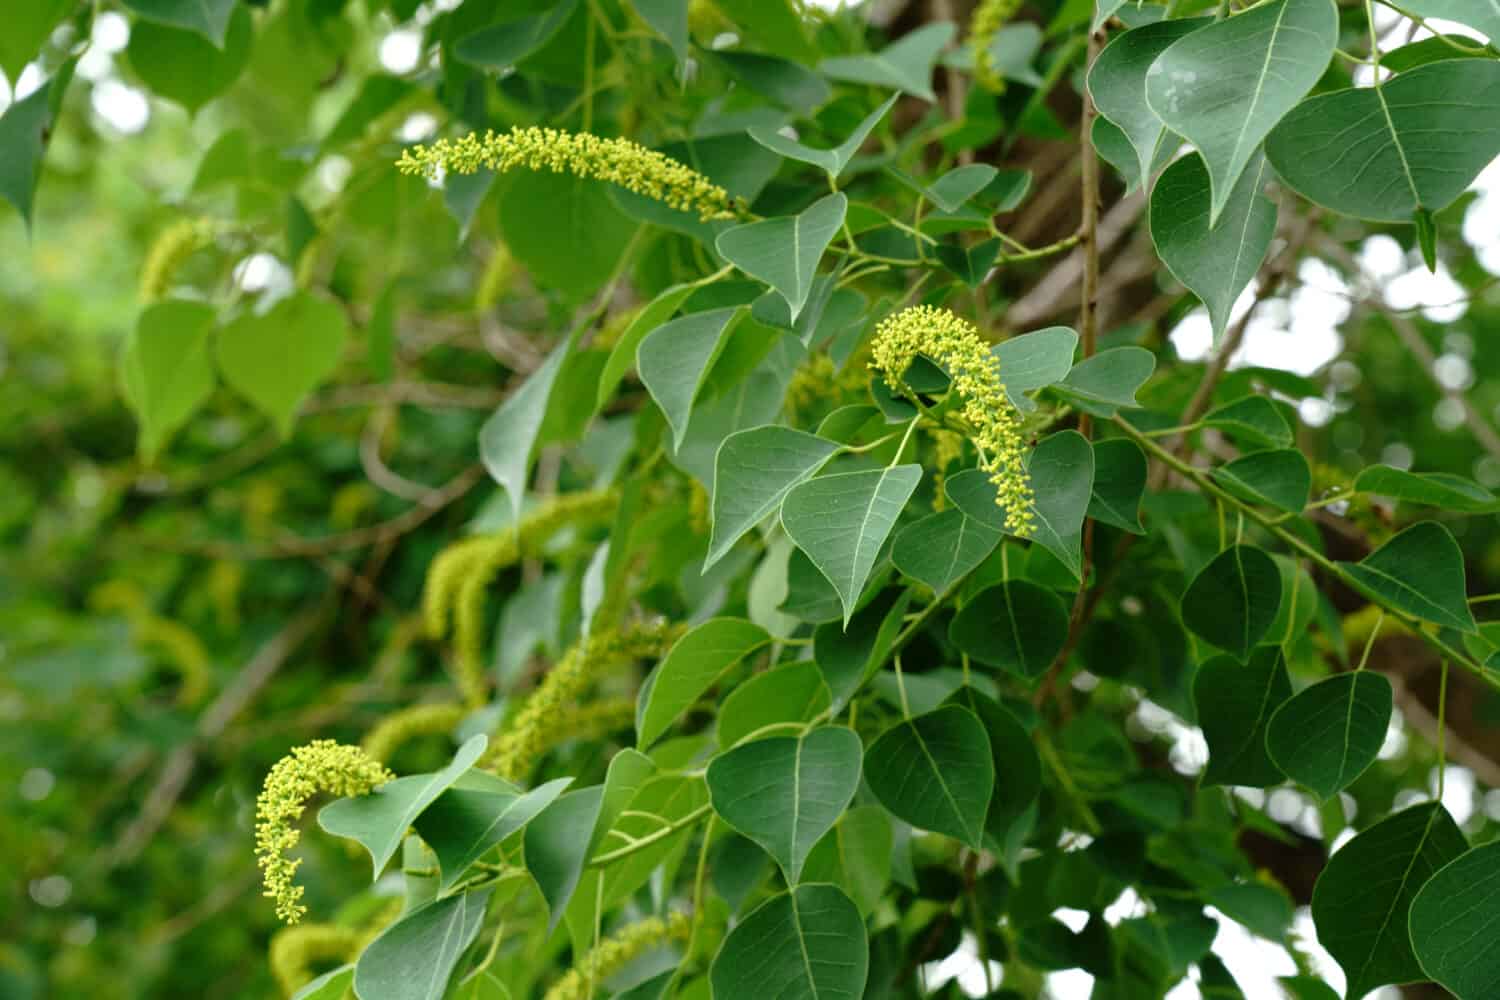 Blossoms of Chinese tallow tree (Triadica sebifera) in summer